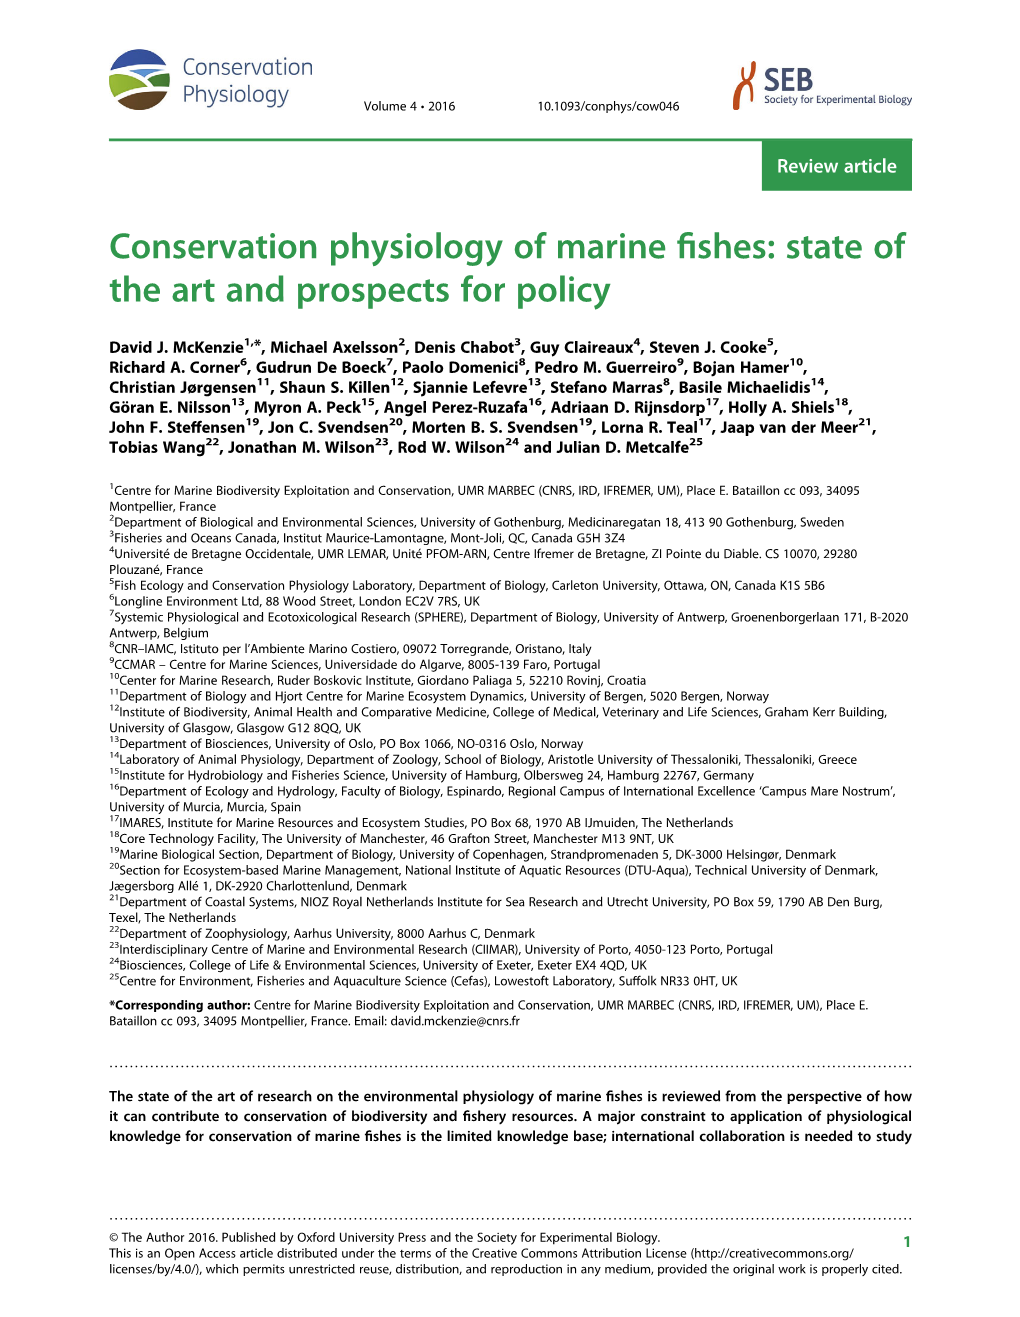 Conservation Physiology of Marine Fishes